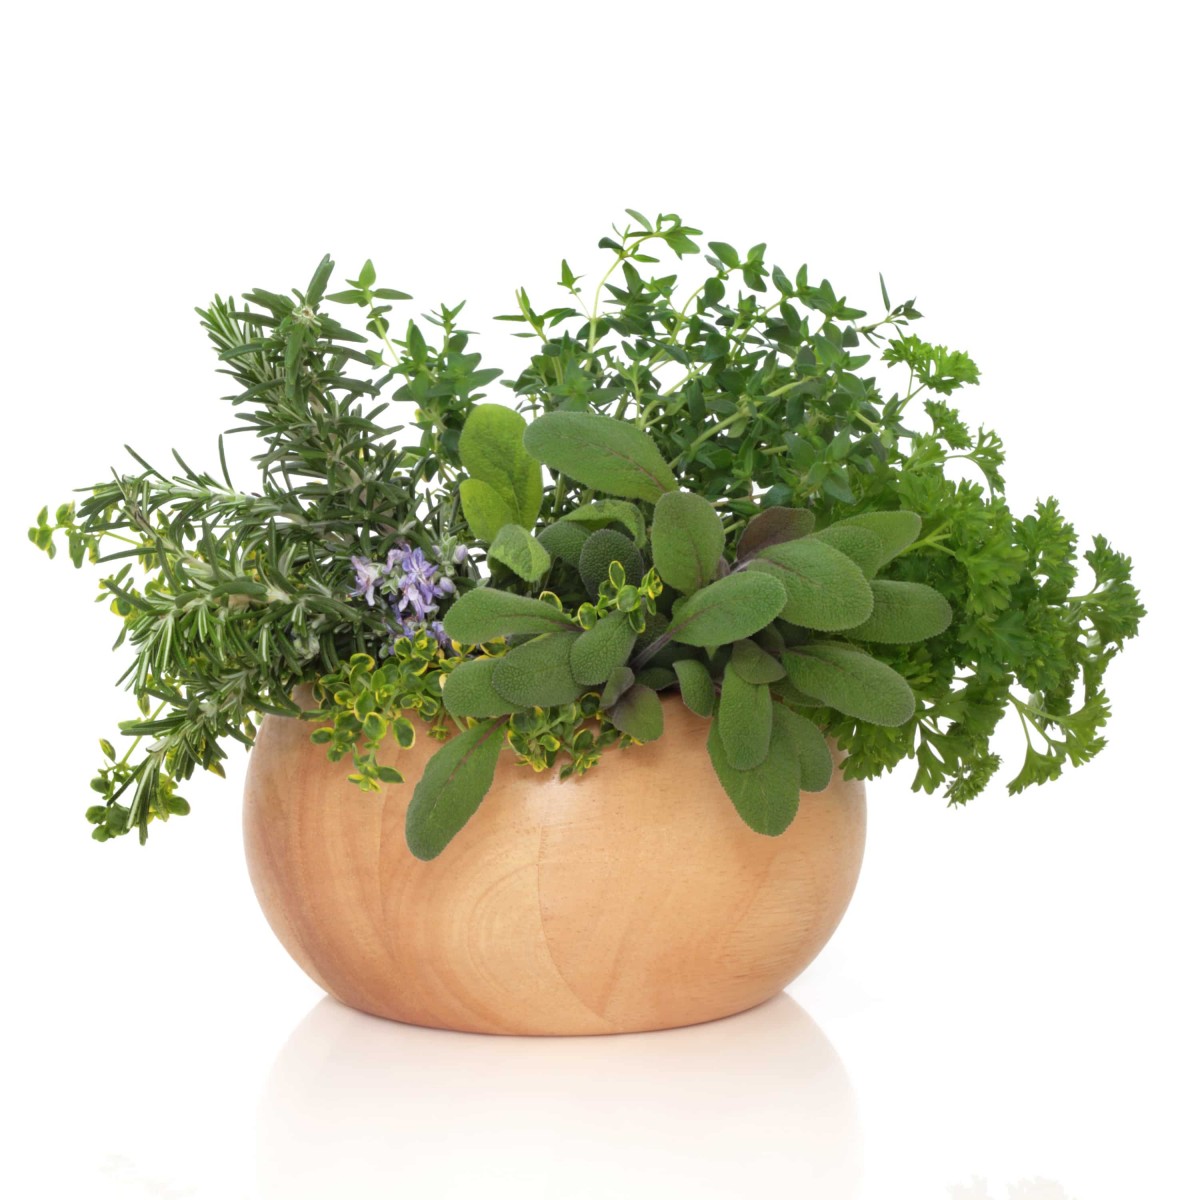 Thyme and Sage